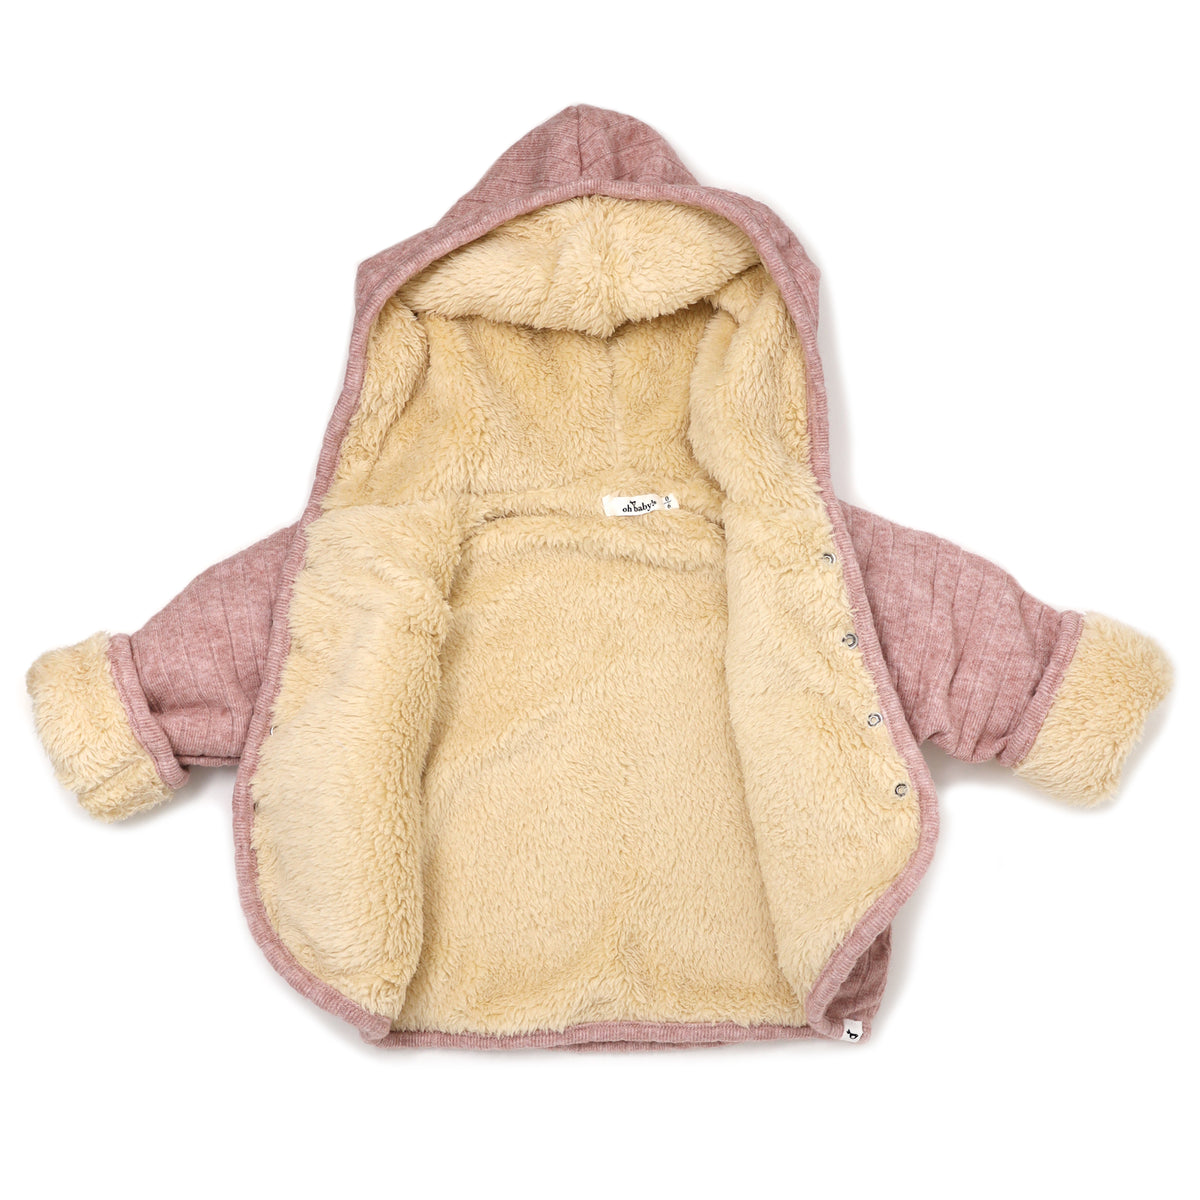 oh baby! Wide Rib Sweater Knit Winter Snowdrift Jacket - Blush Heather (Biscuit Lining)